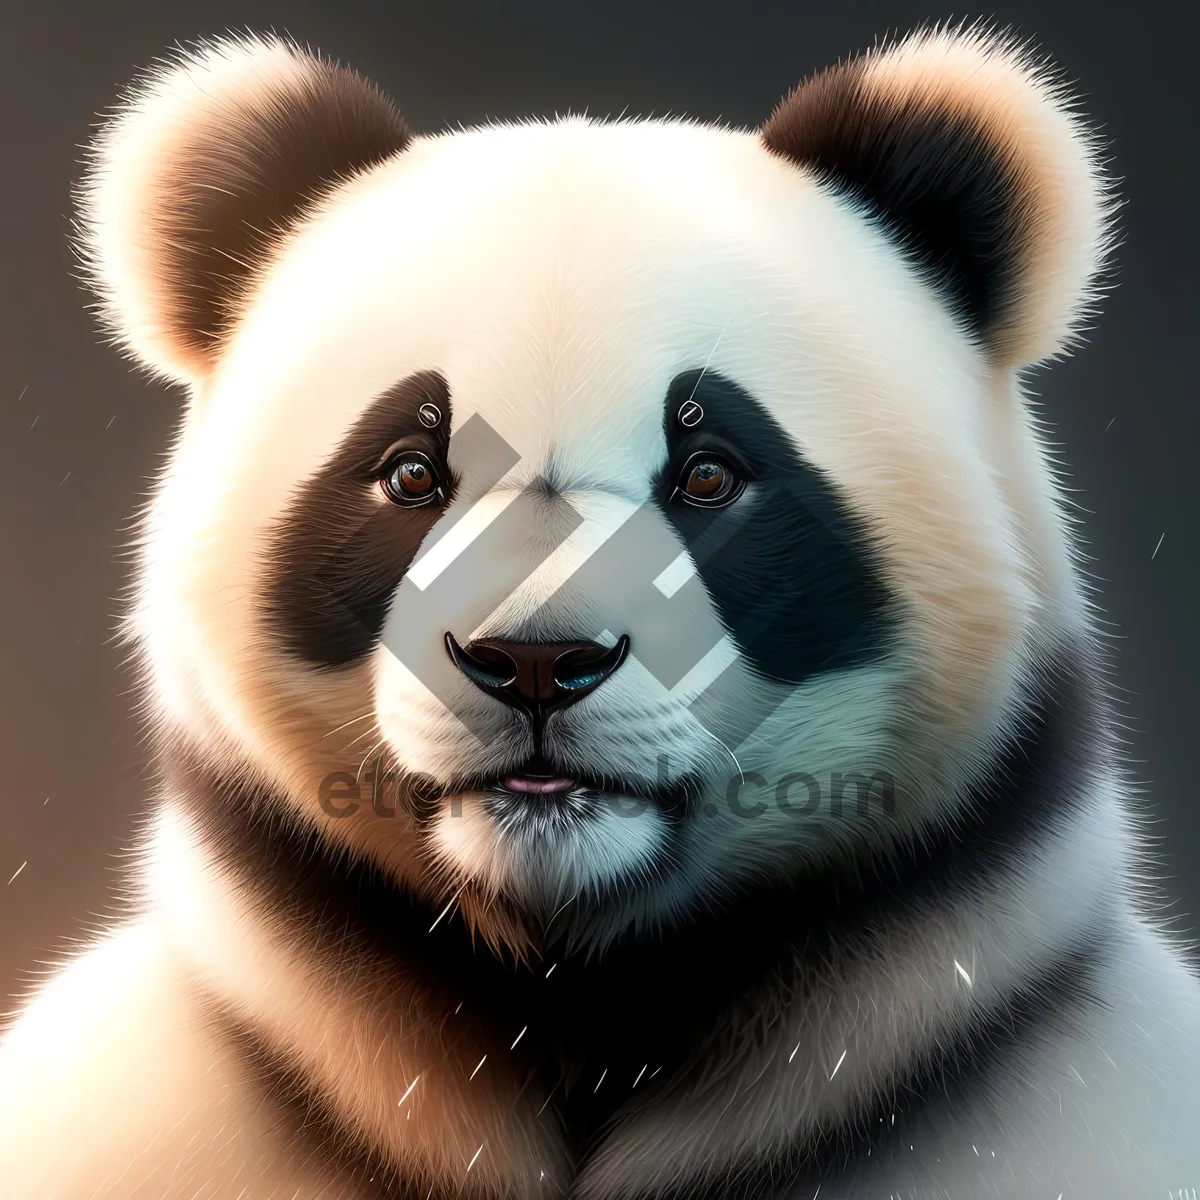 Picture of Giant Panda: Adorable Wild Bear with Black and White Fur